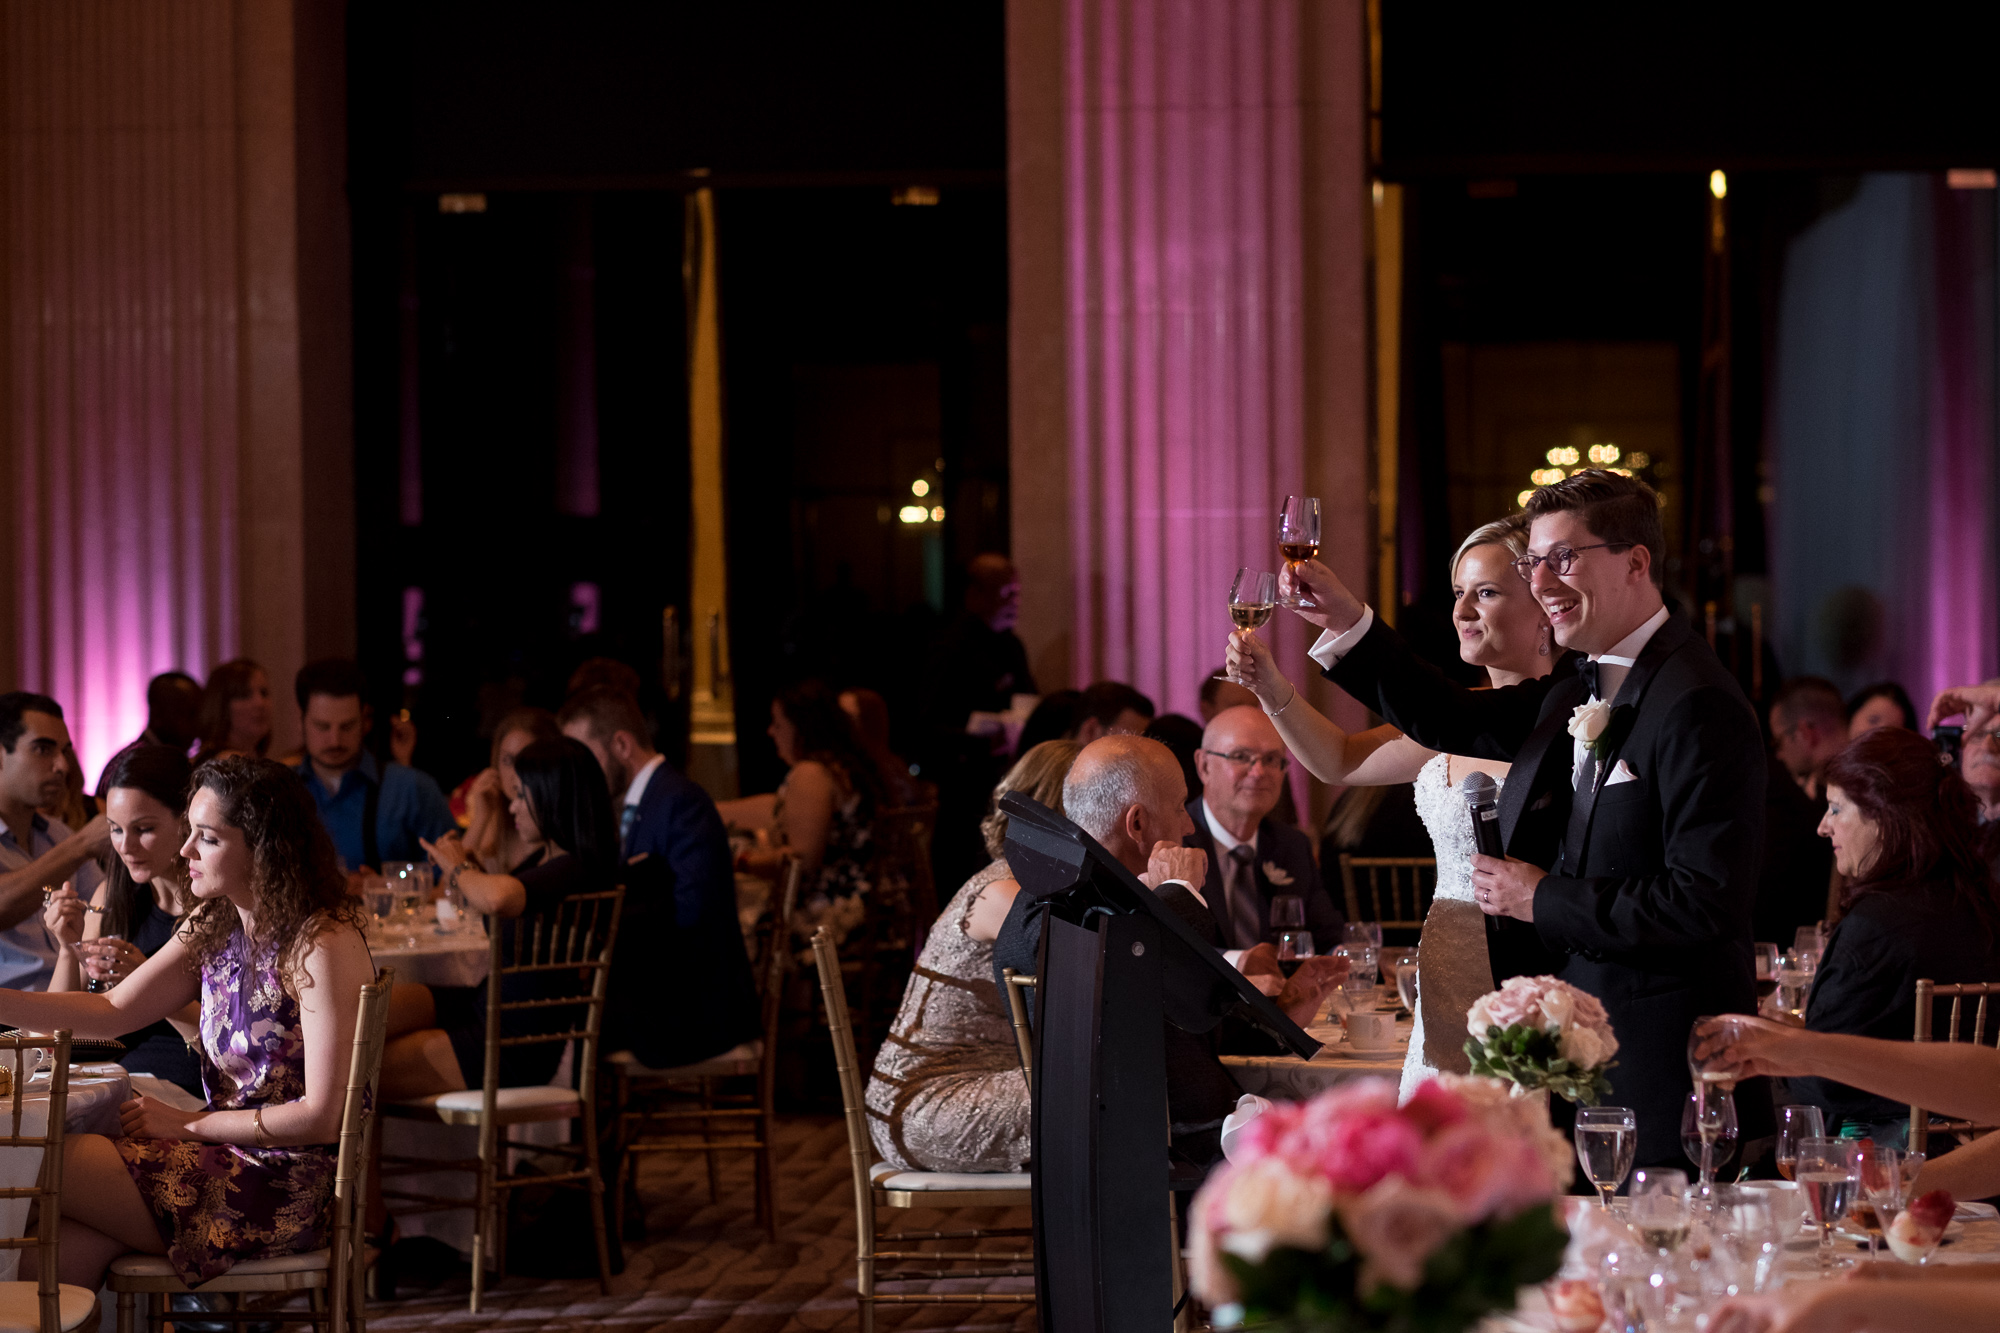  Danielle + Eric toast their guests during their speech at their wedding reception at the One King West Hotel in Toronto.&nbsp; 